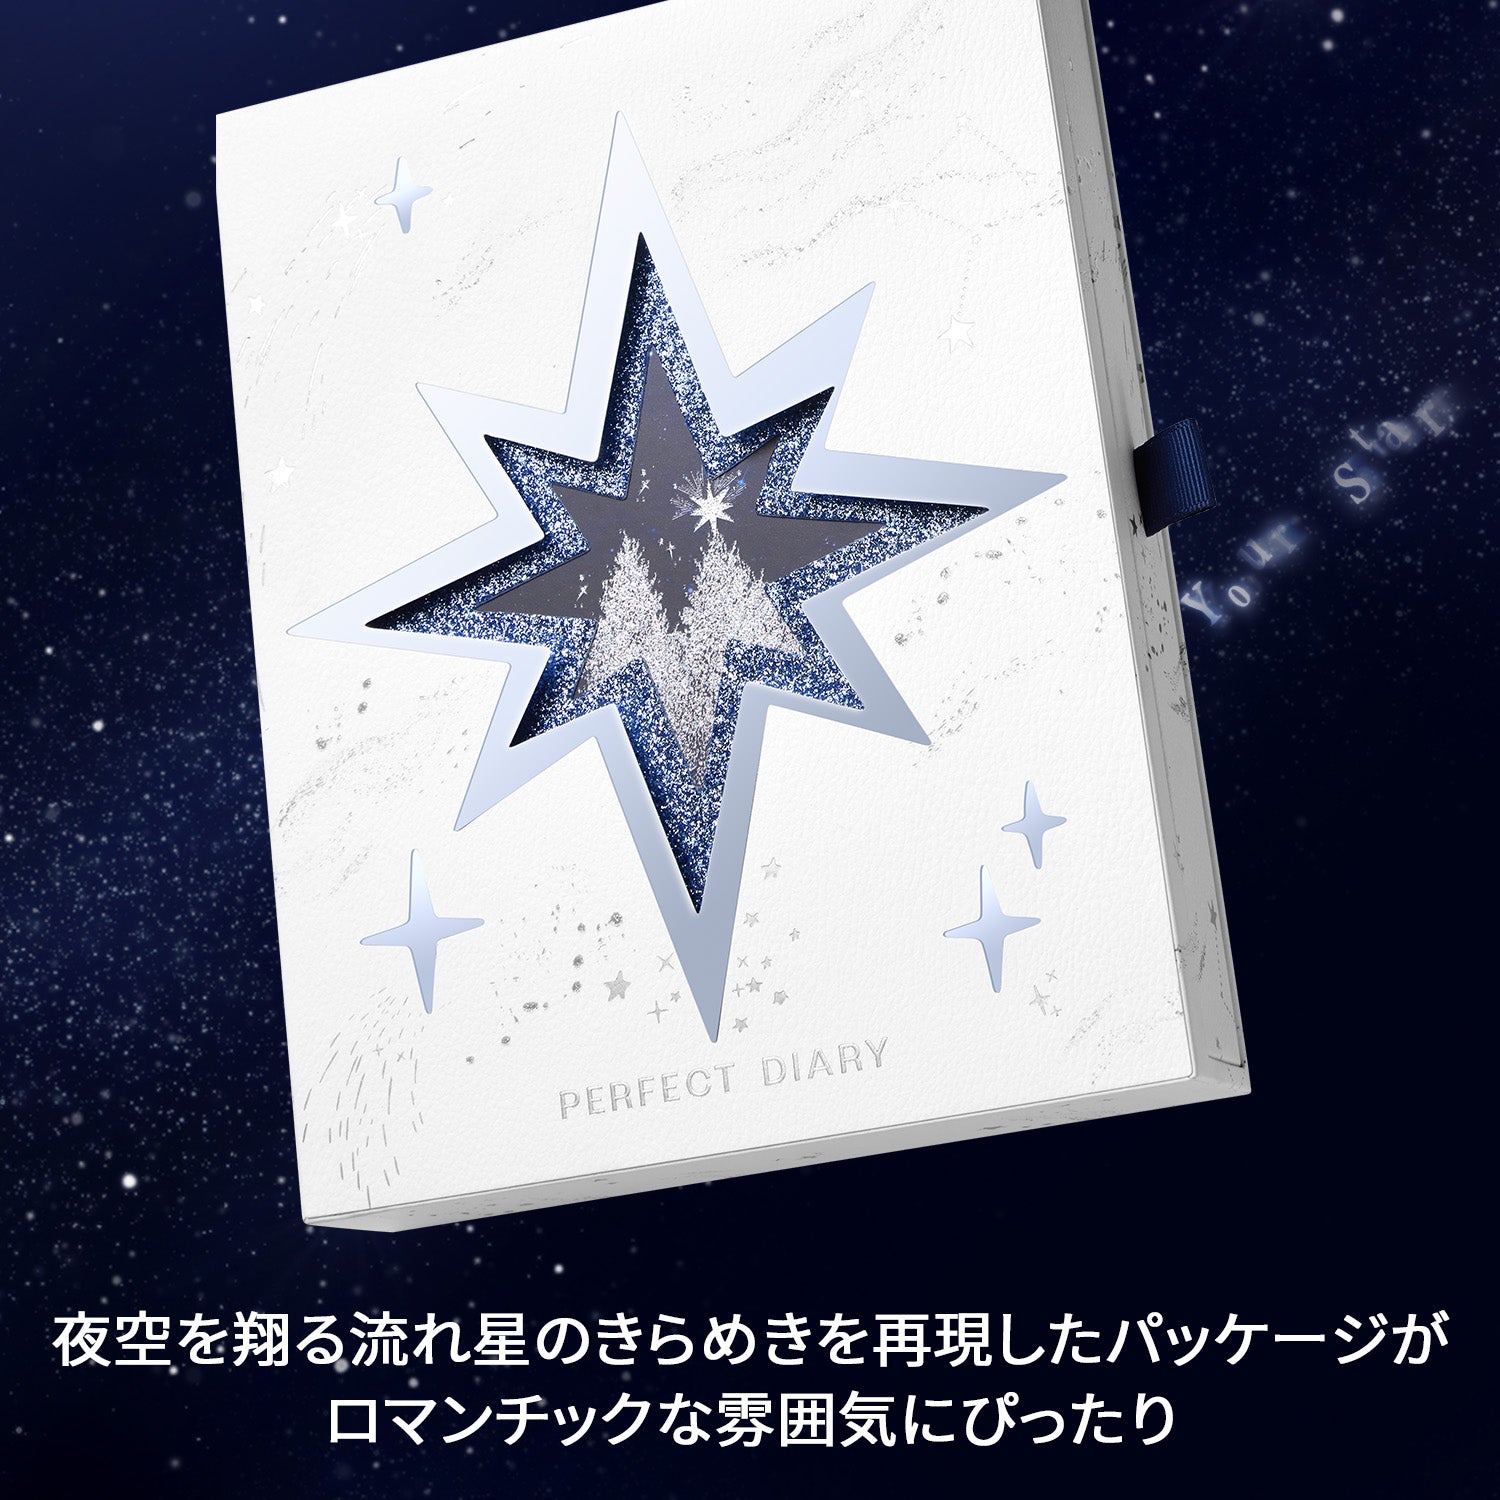 PERFECT DIARY (パーフェクトダイアリー)「願い星」クリスマスギフトセット